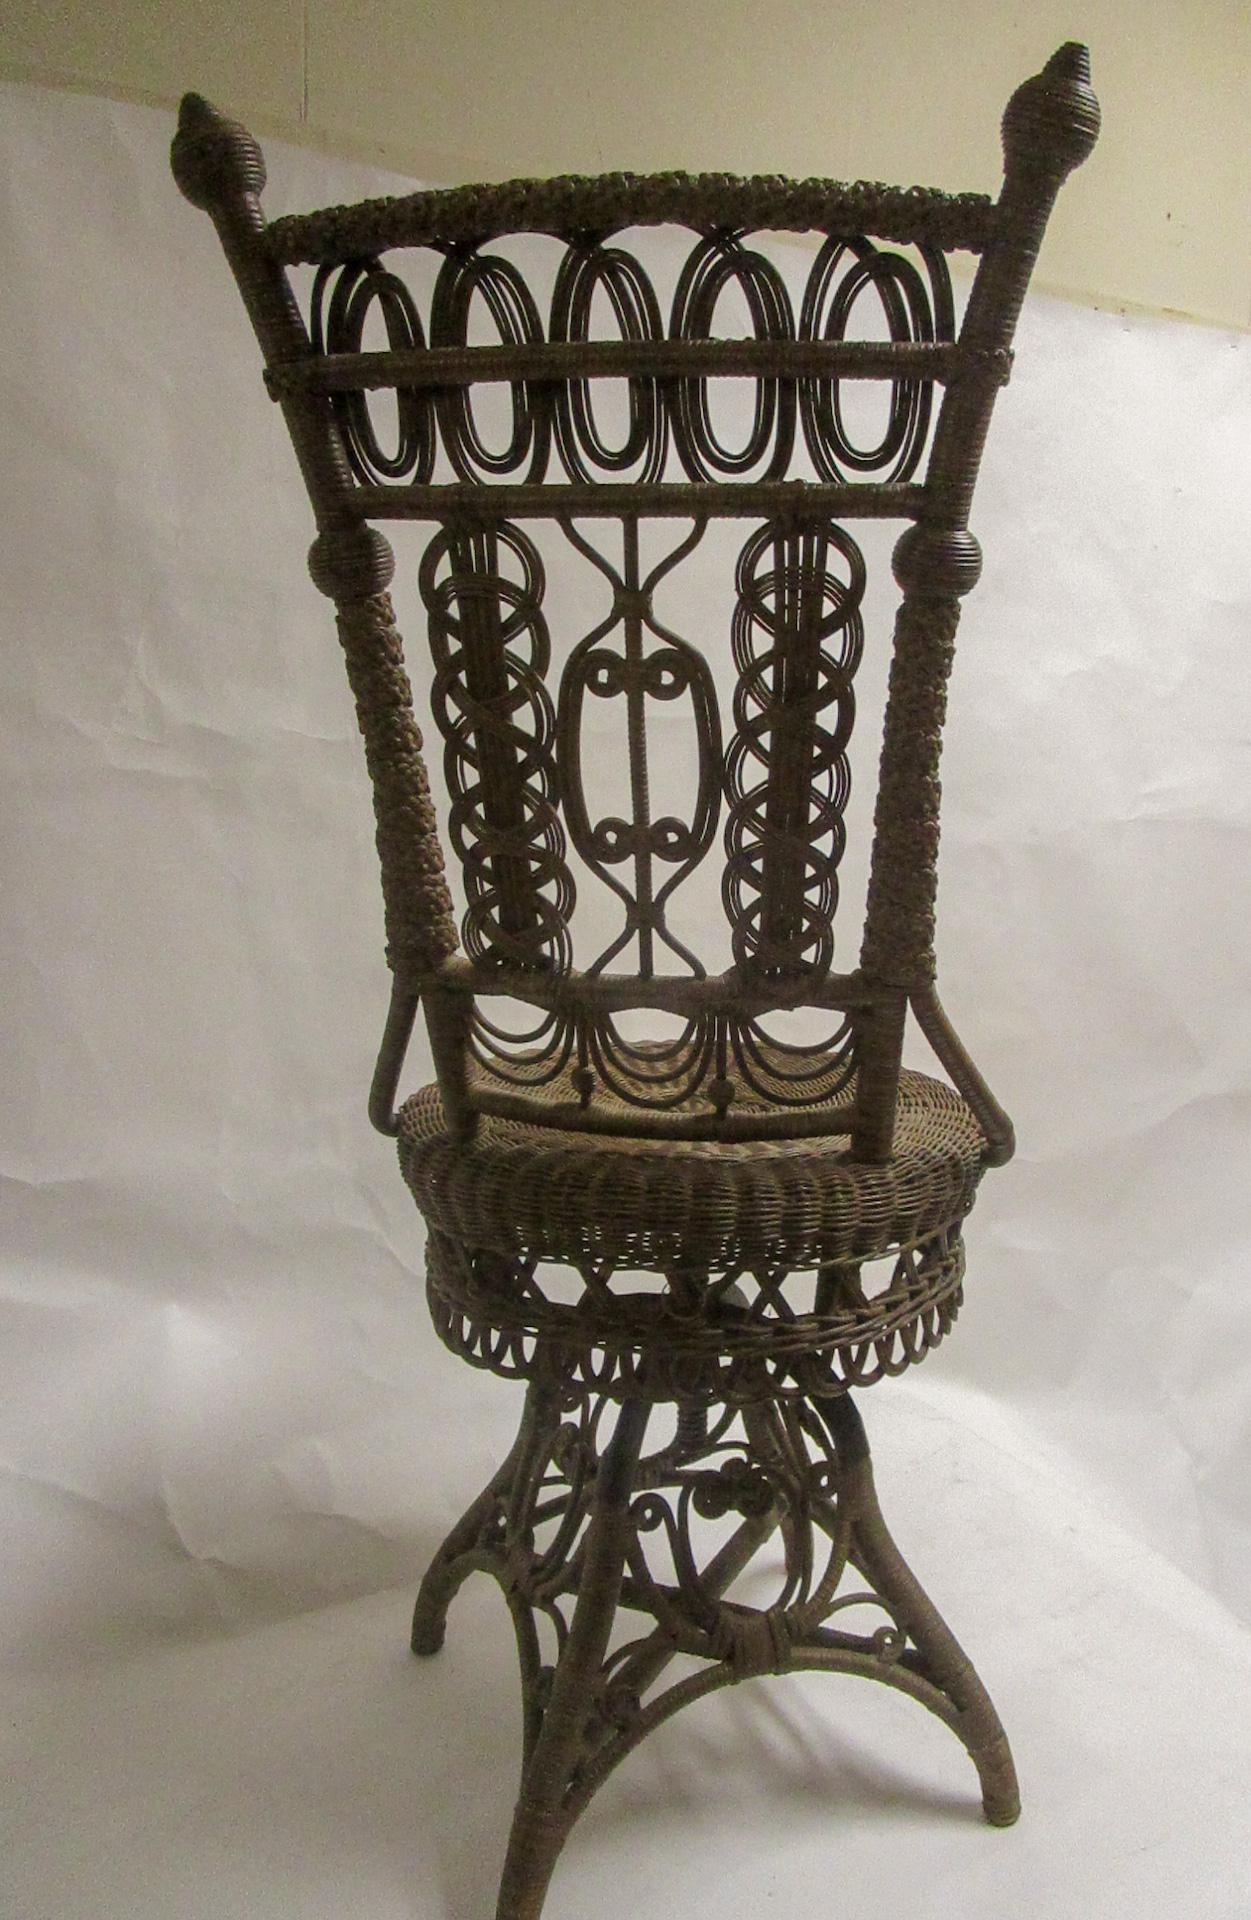 This fanciful Victorian wicker swivel piano chair has all the bells and whistles of the most prestigious American wicker designers Heywood Brothers and Wakefield Company. Curlicues, various intricate weaves, braiding, swags, beads and balls are the